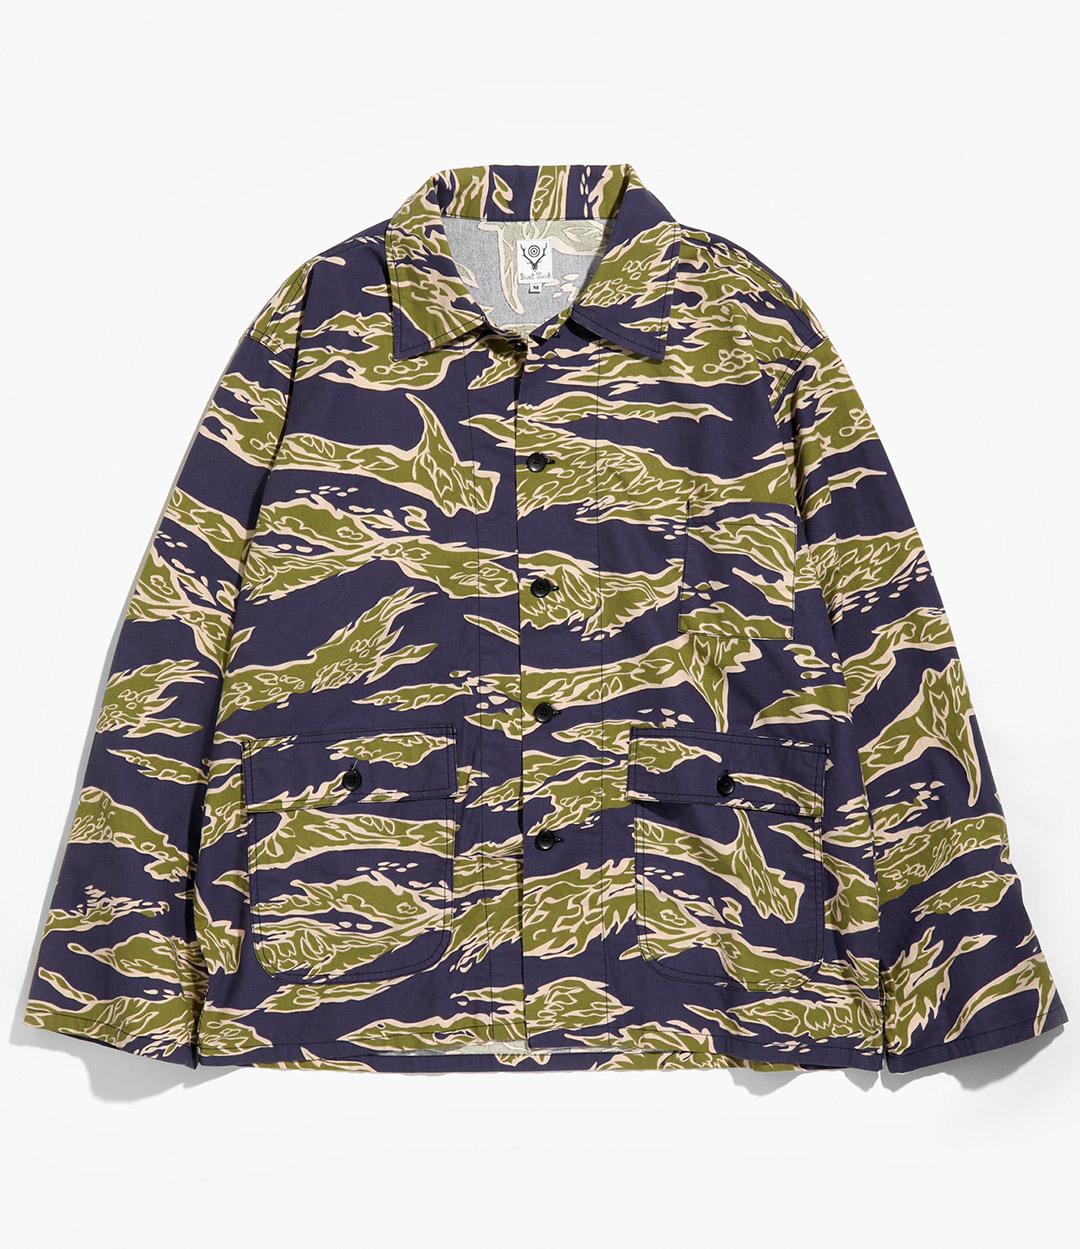 SOUTH2 WEST8〉プリントデザインが光るHUNTING SHIRT | NEPENTHES ...